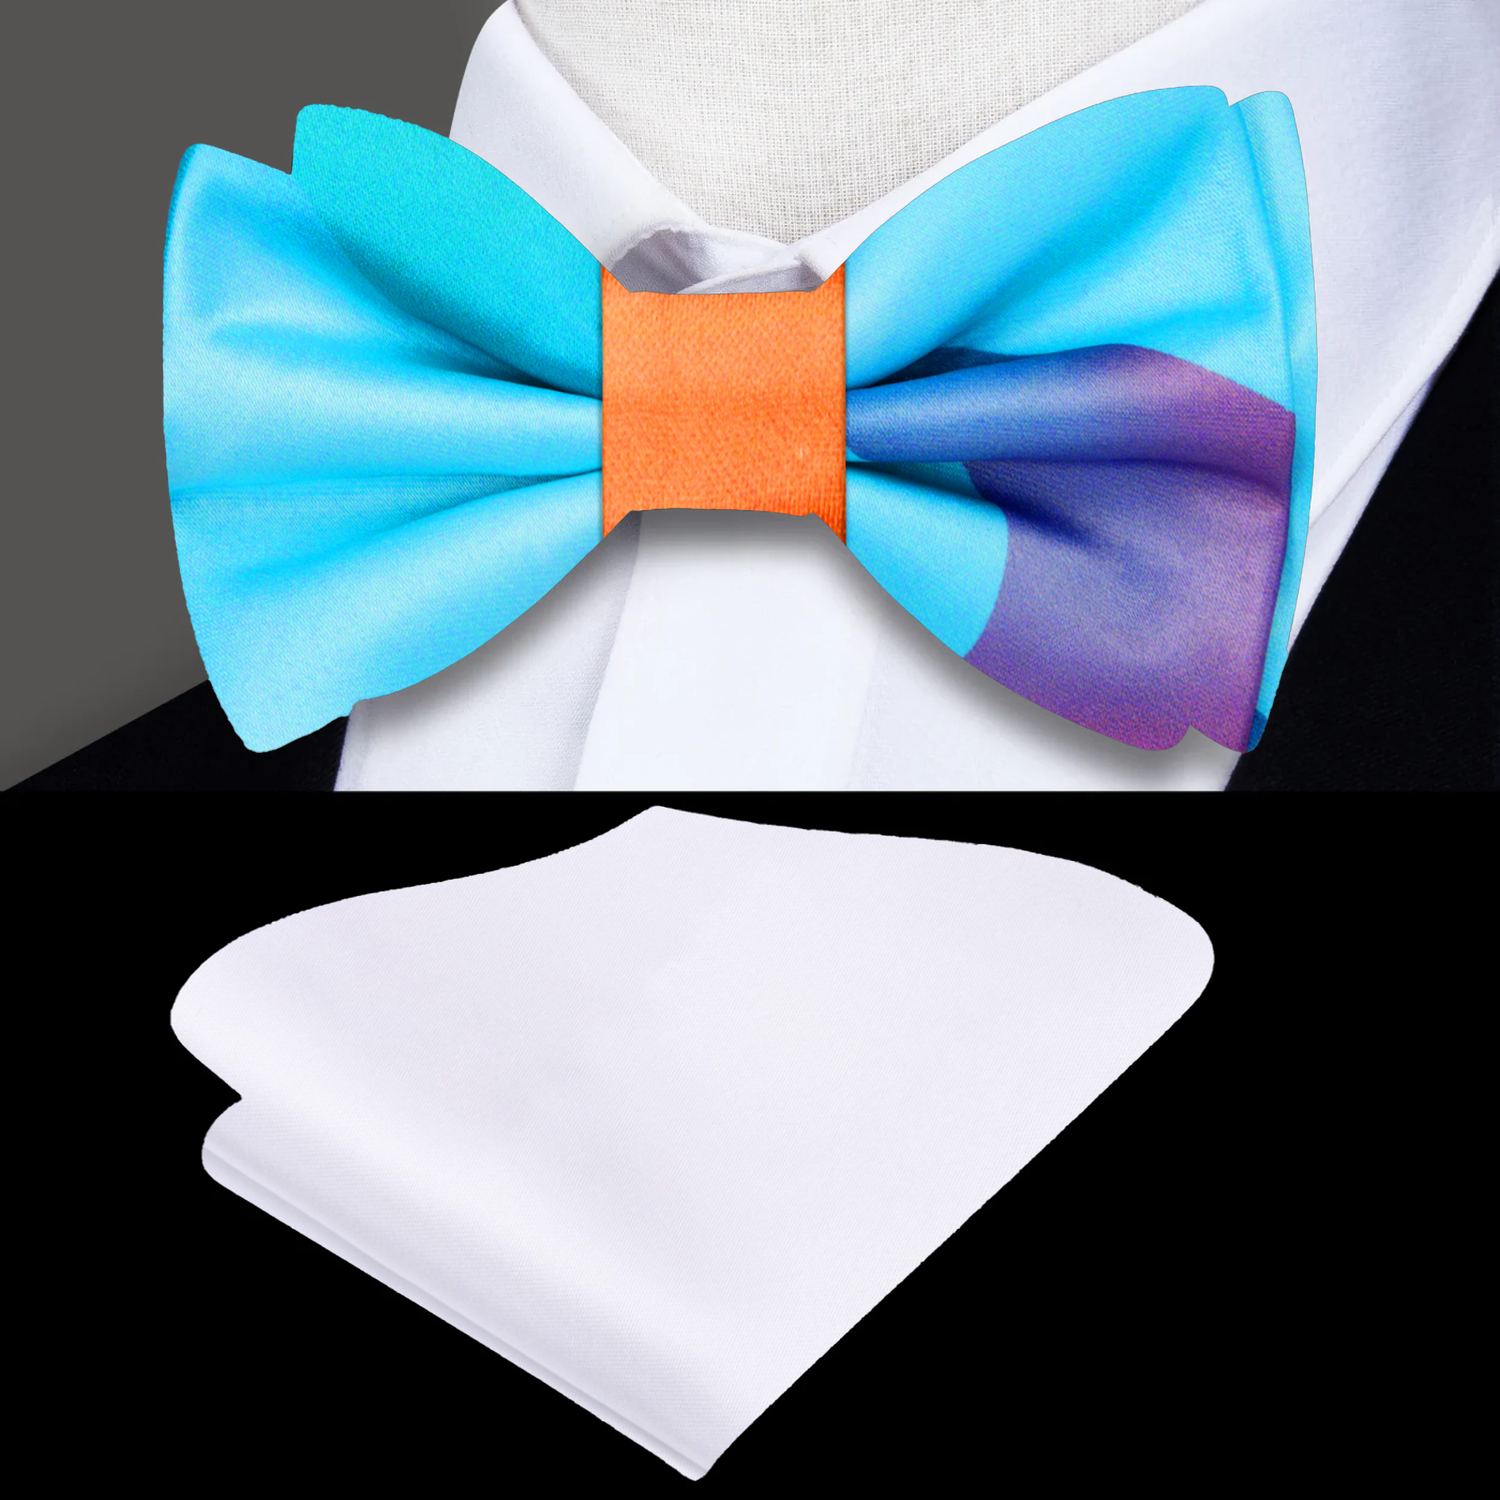 Colorful It’s Melting Bow Tie White Square